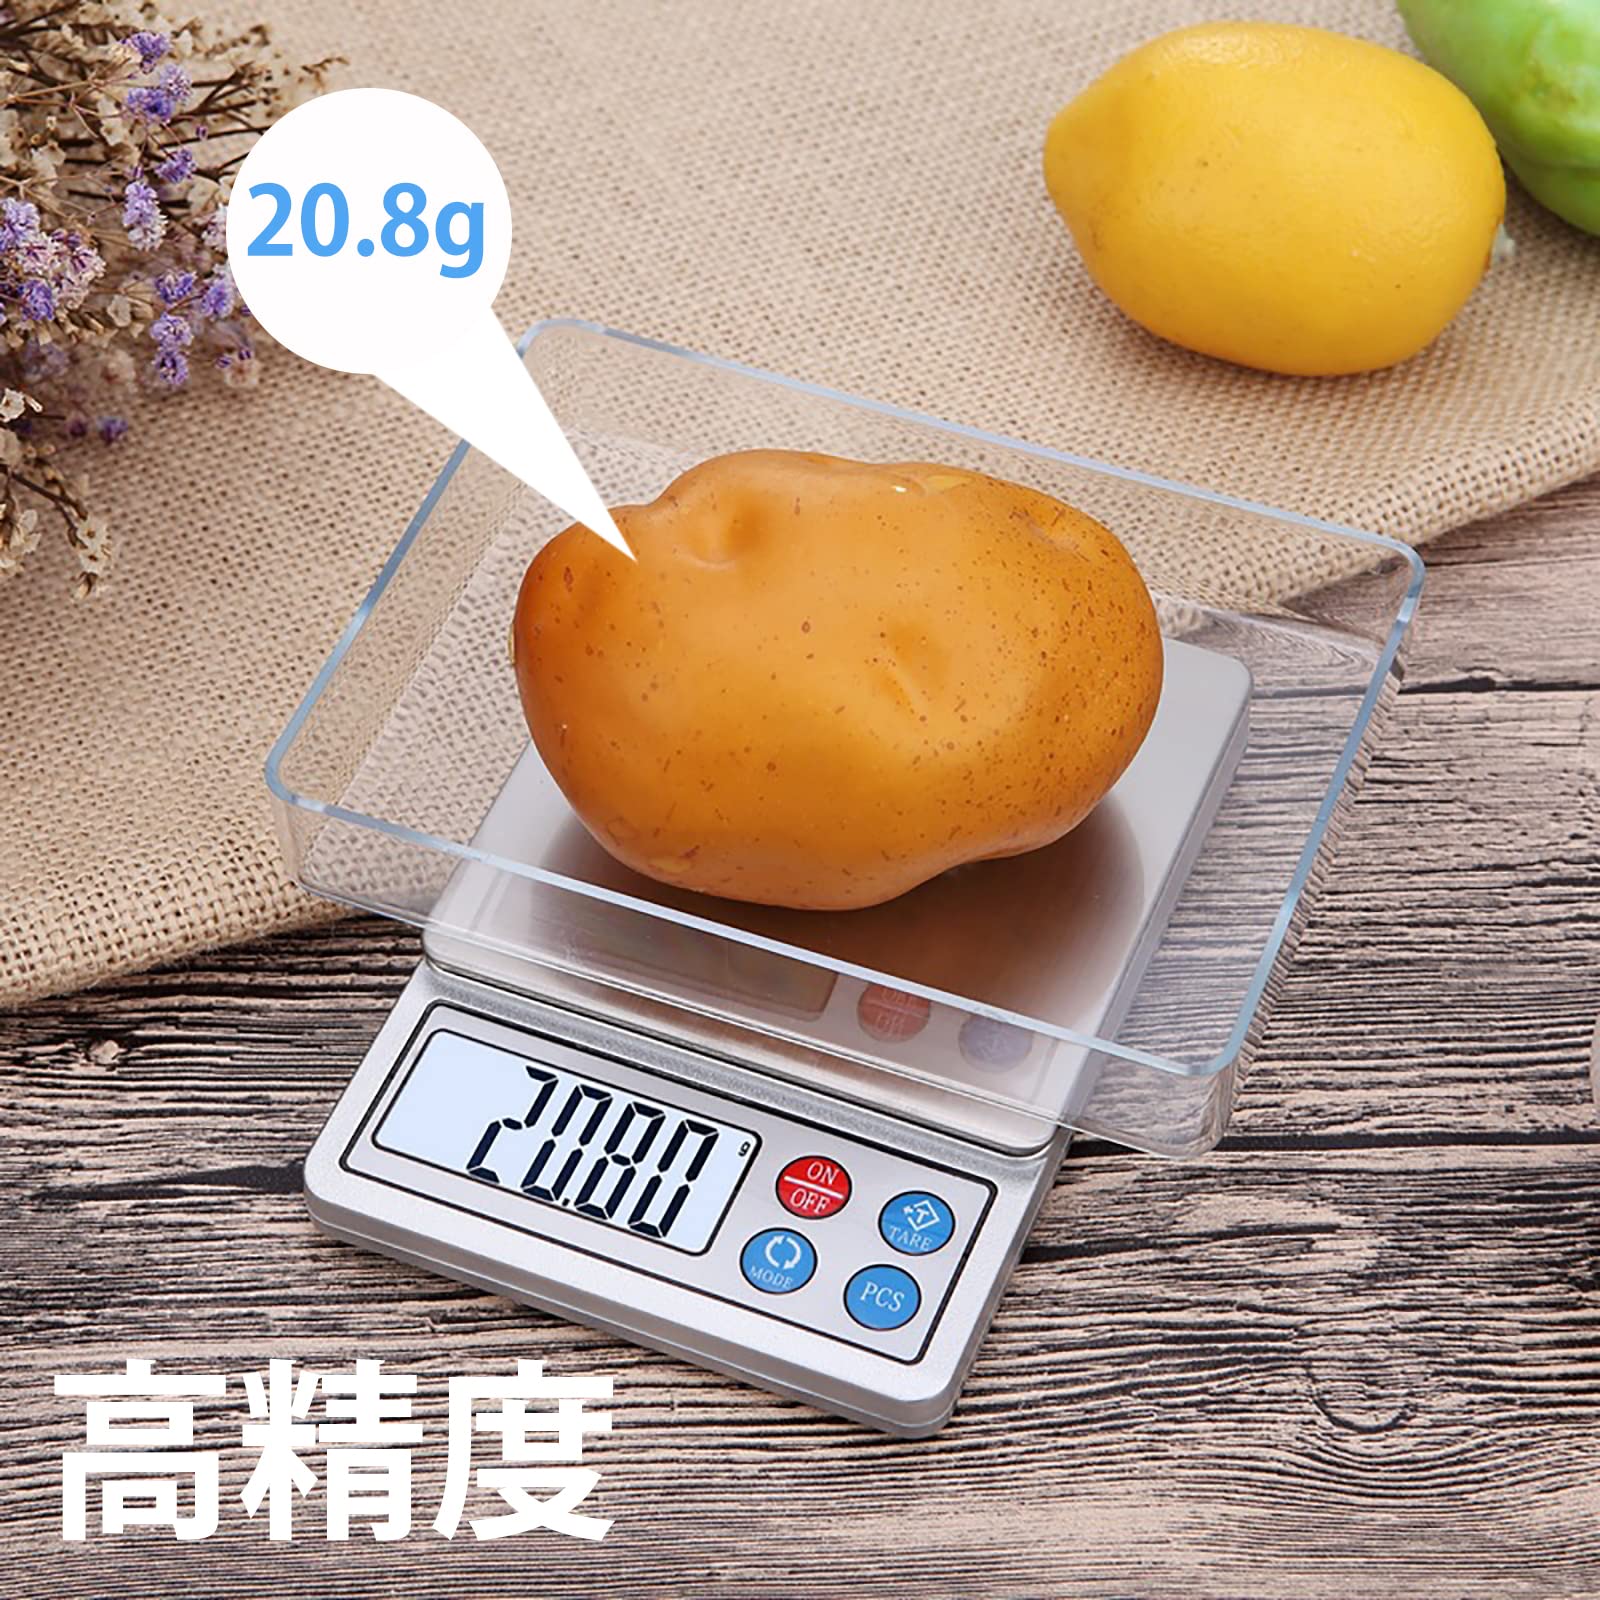 ZooYi digital scale scale kitchen 0.01g from 600g till measurement possibility cooking digital usb charge manner sack discount function scale precise electron scales 